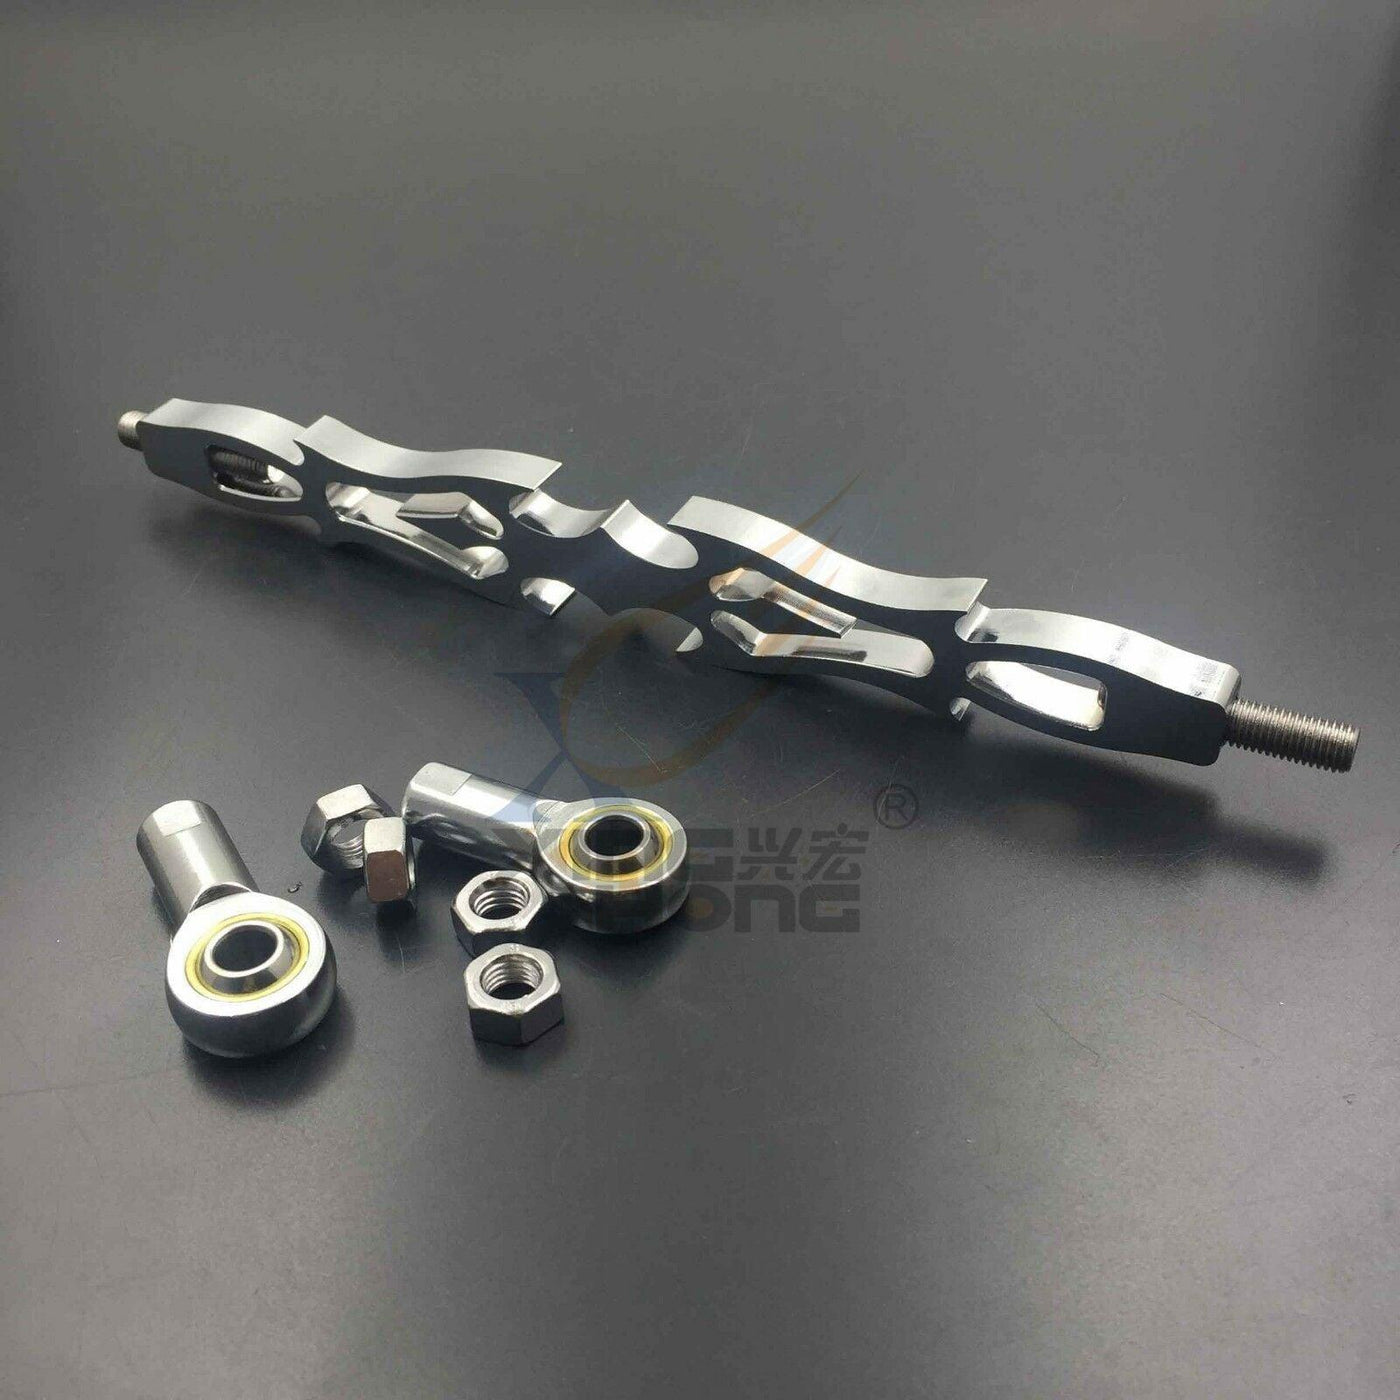 Chrome Spear Shift Linkage For Harley Softail Fxdwg Dyna Glide Flhr Flht - Moto Life Products